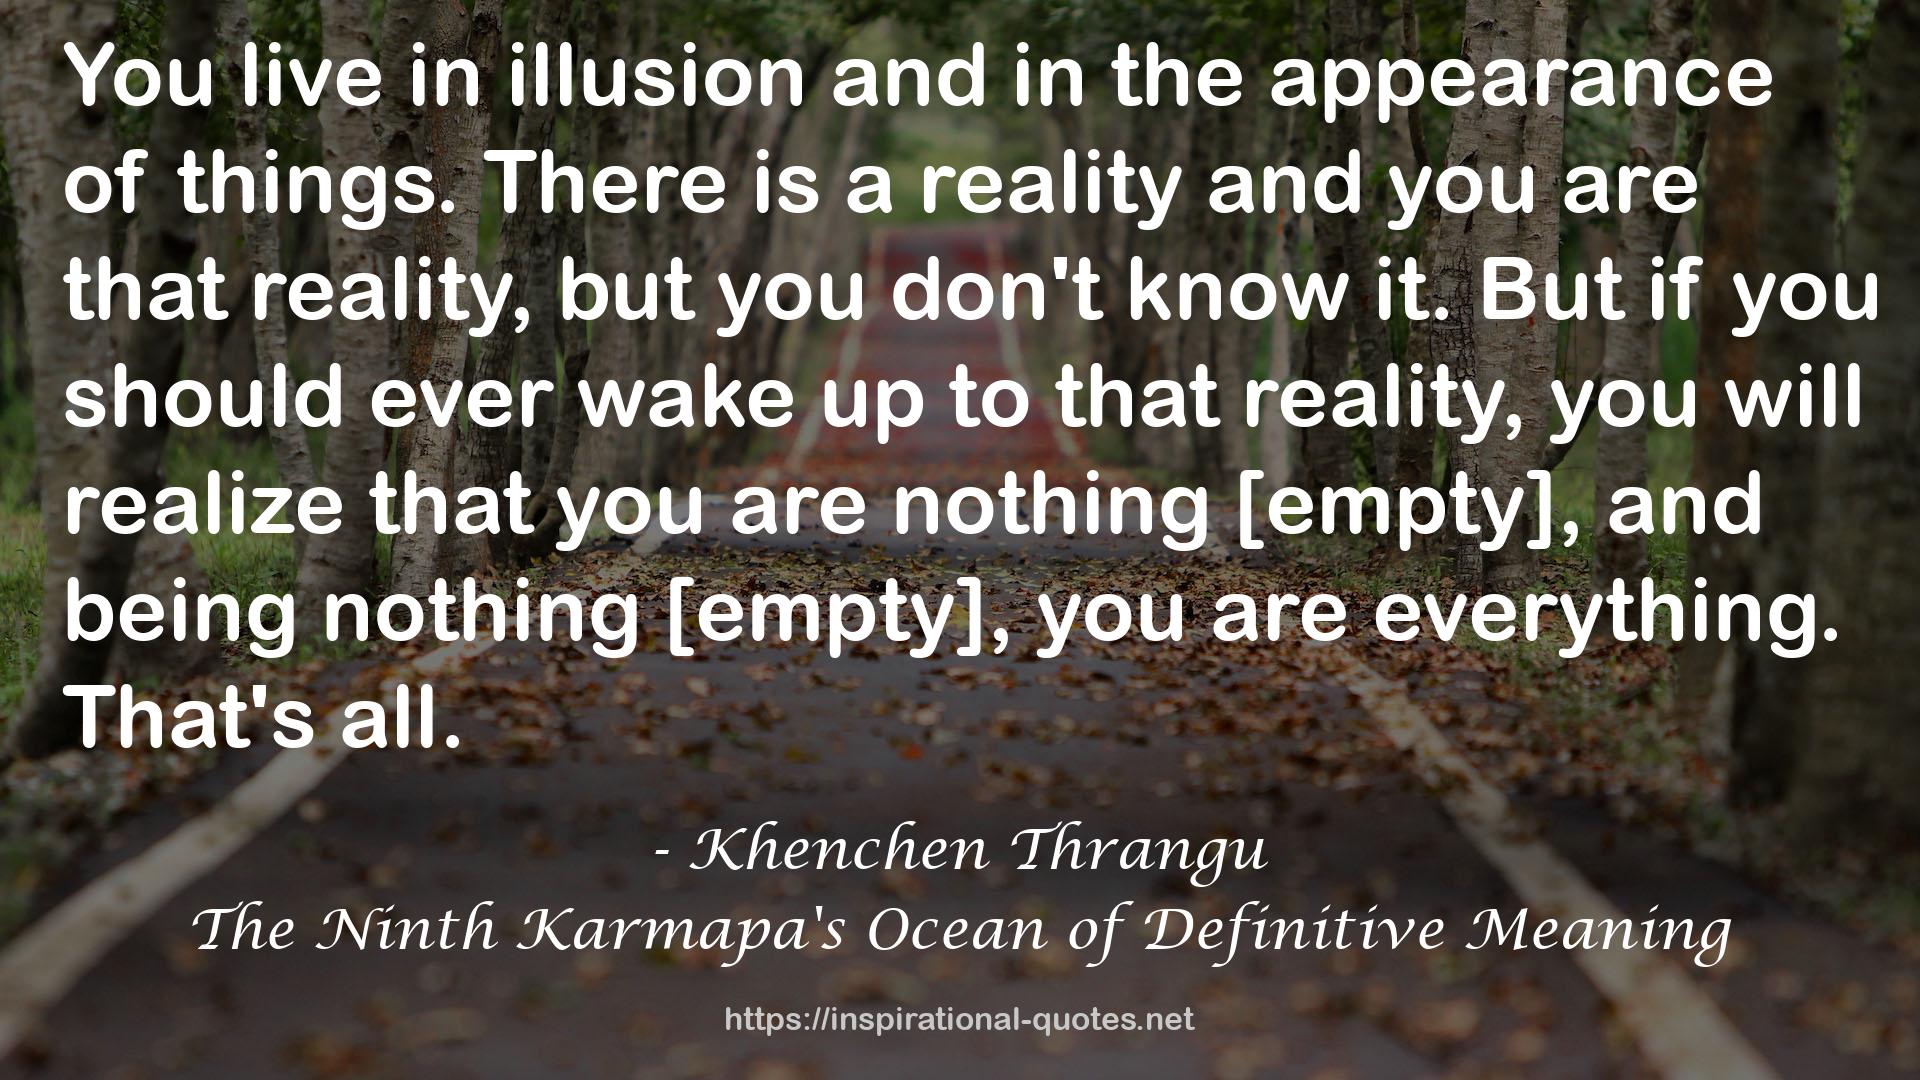 The Ninth Karmapa's Ocean of Definitive Meaning QUOTES